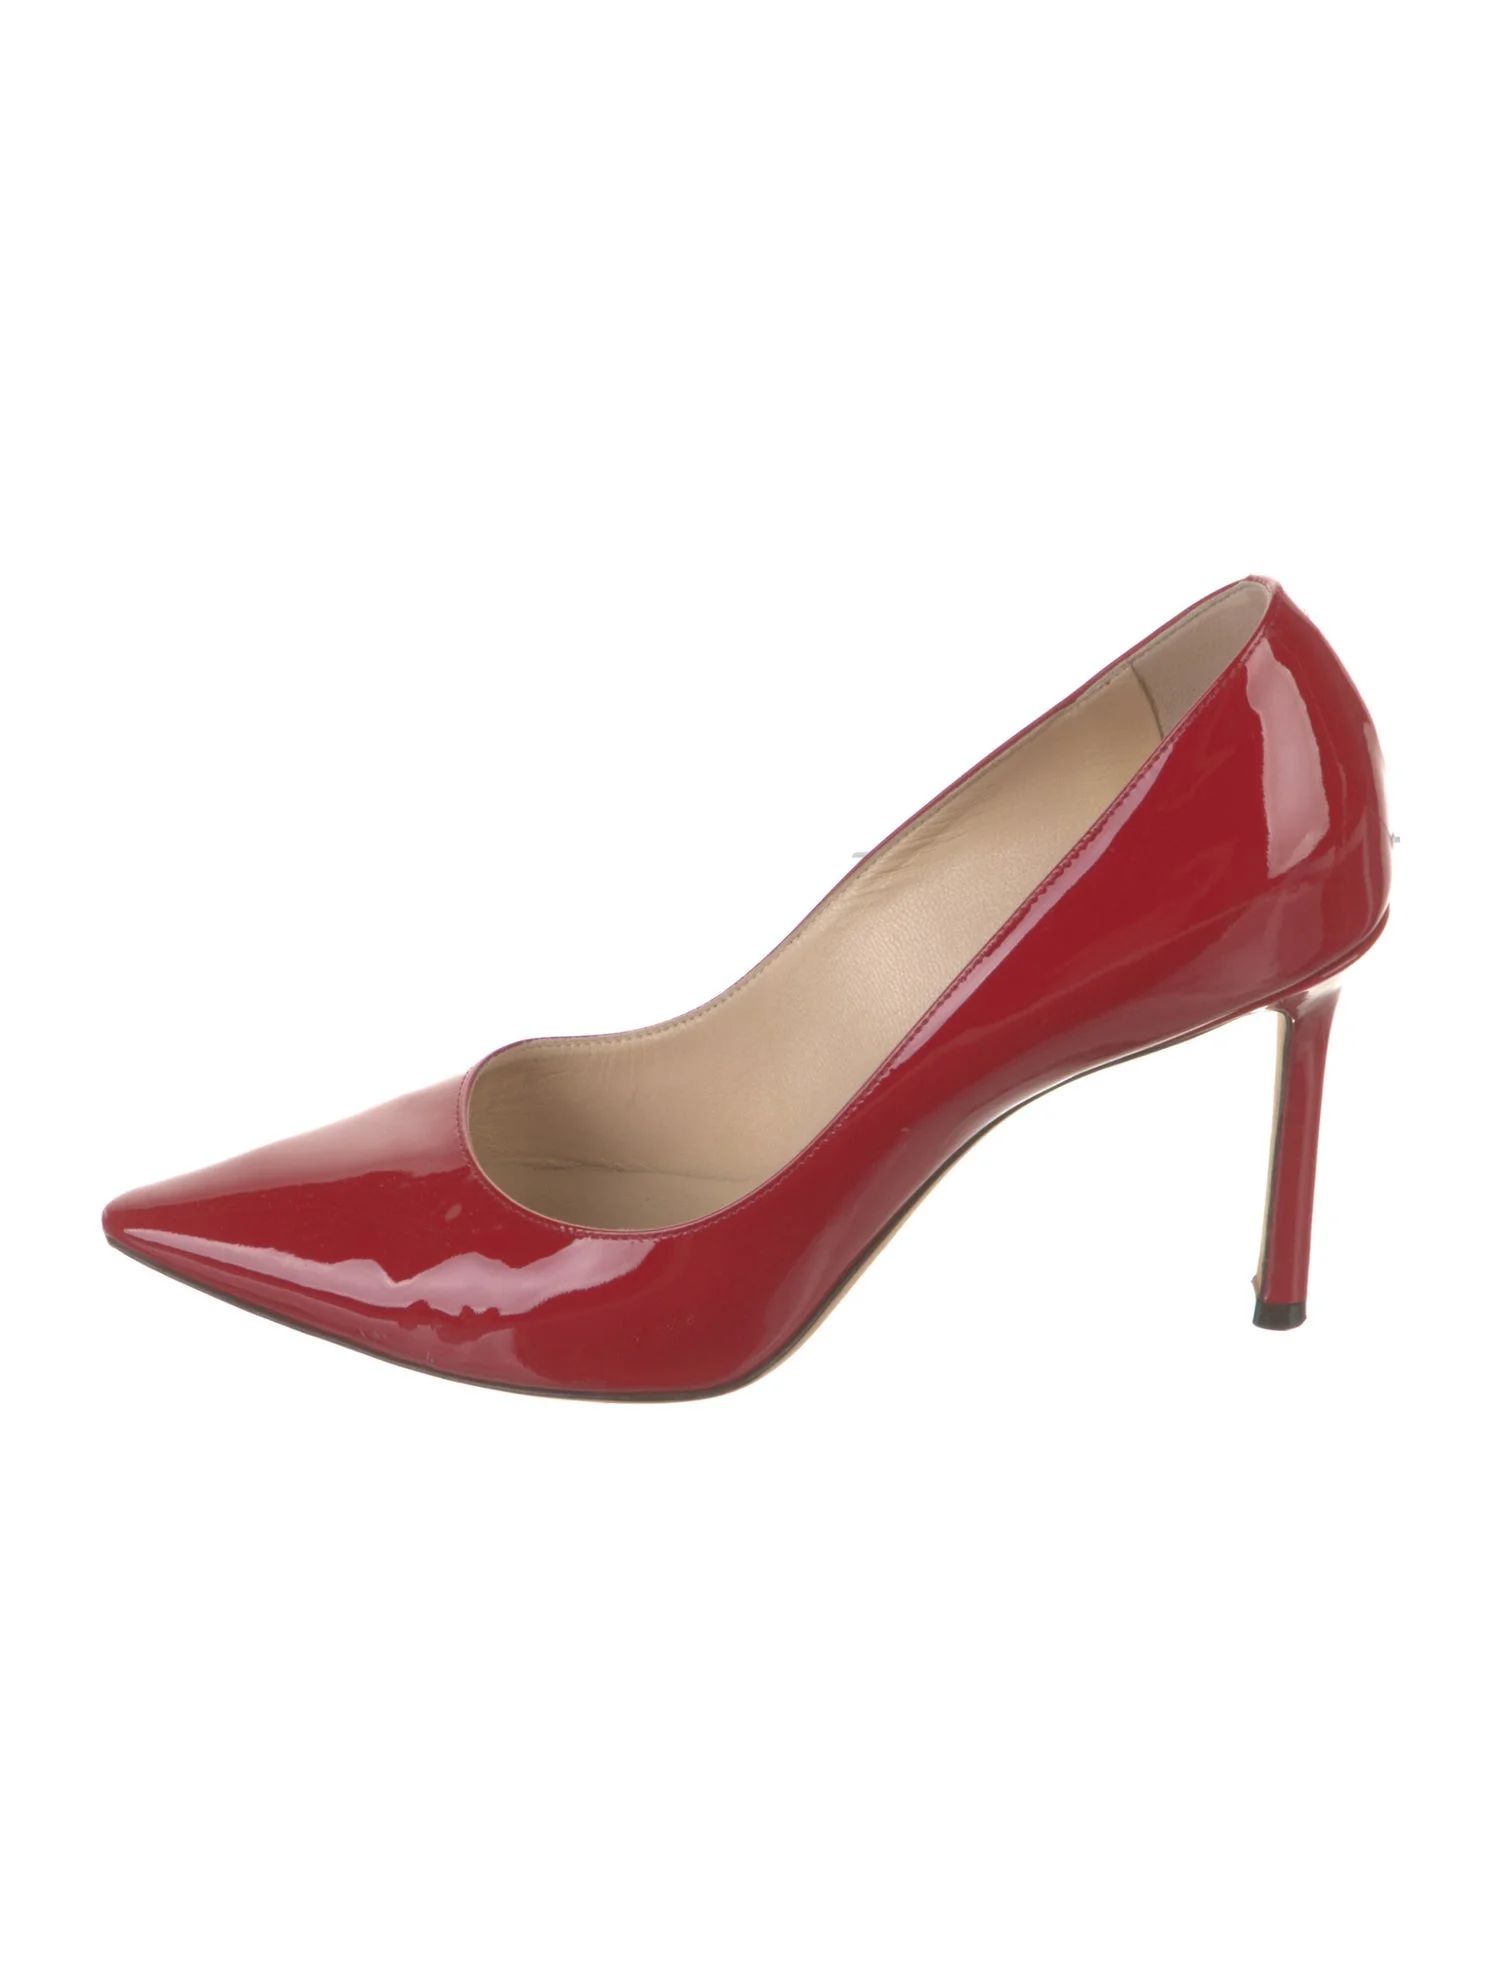 Patent Leather Pumps | The RealReal